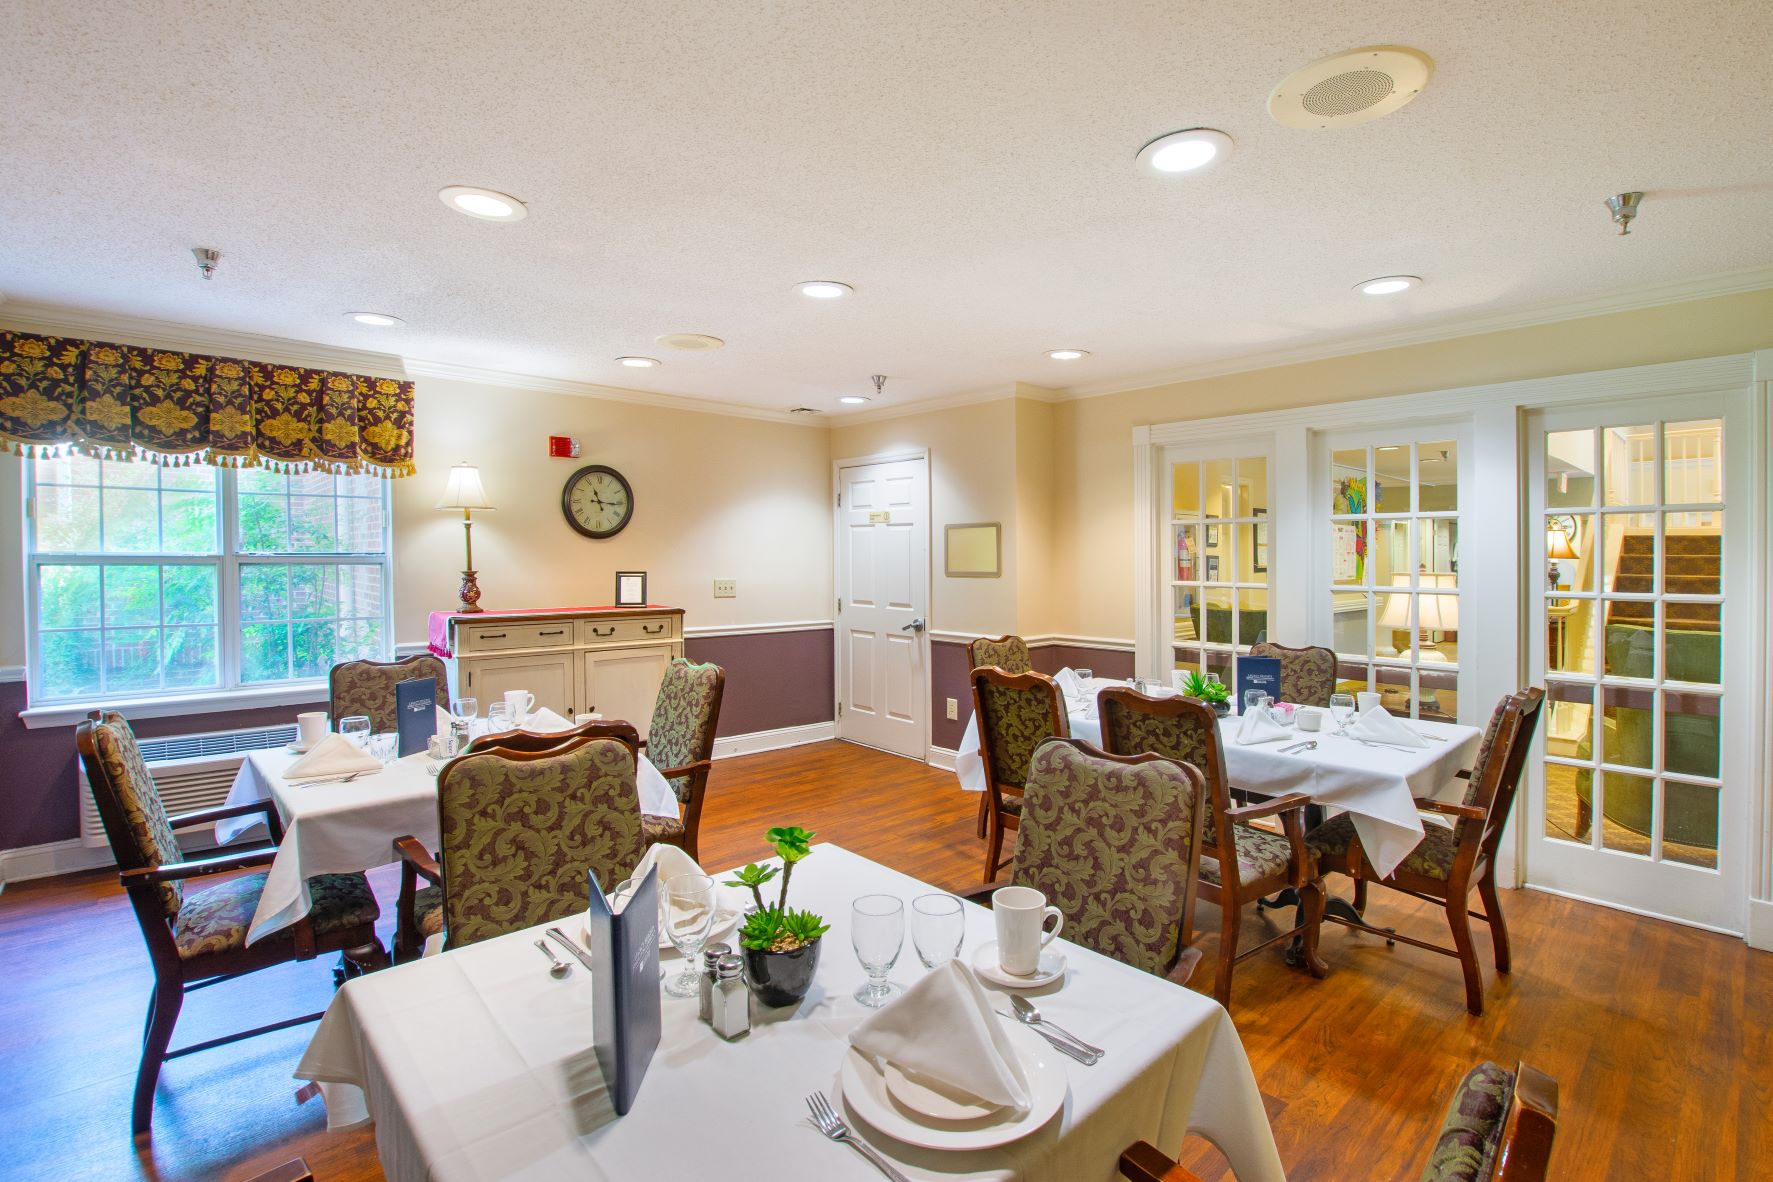 Legacy Heights Senior Living Community boasts a spacious dining area for our seniors!